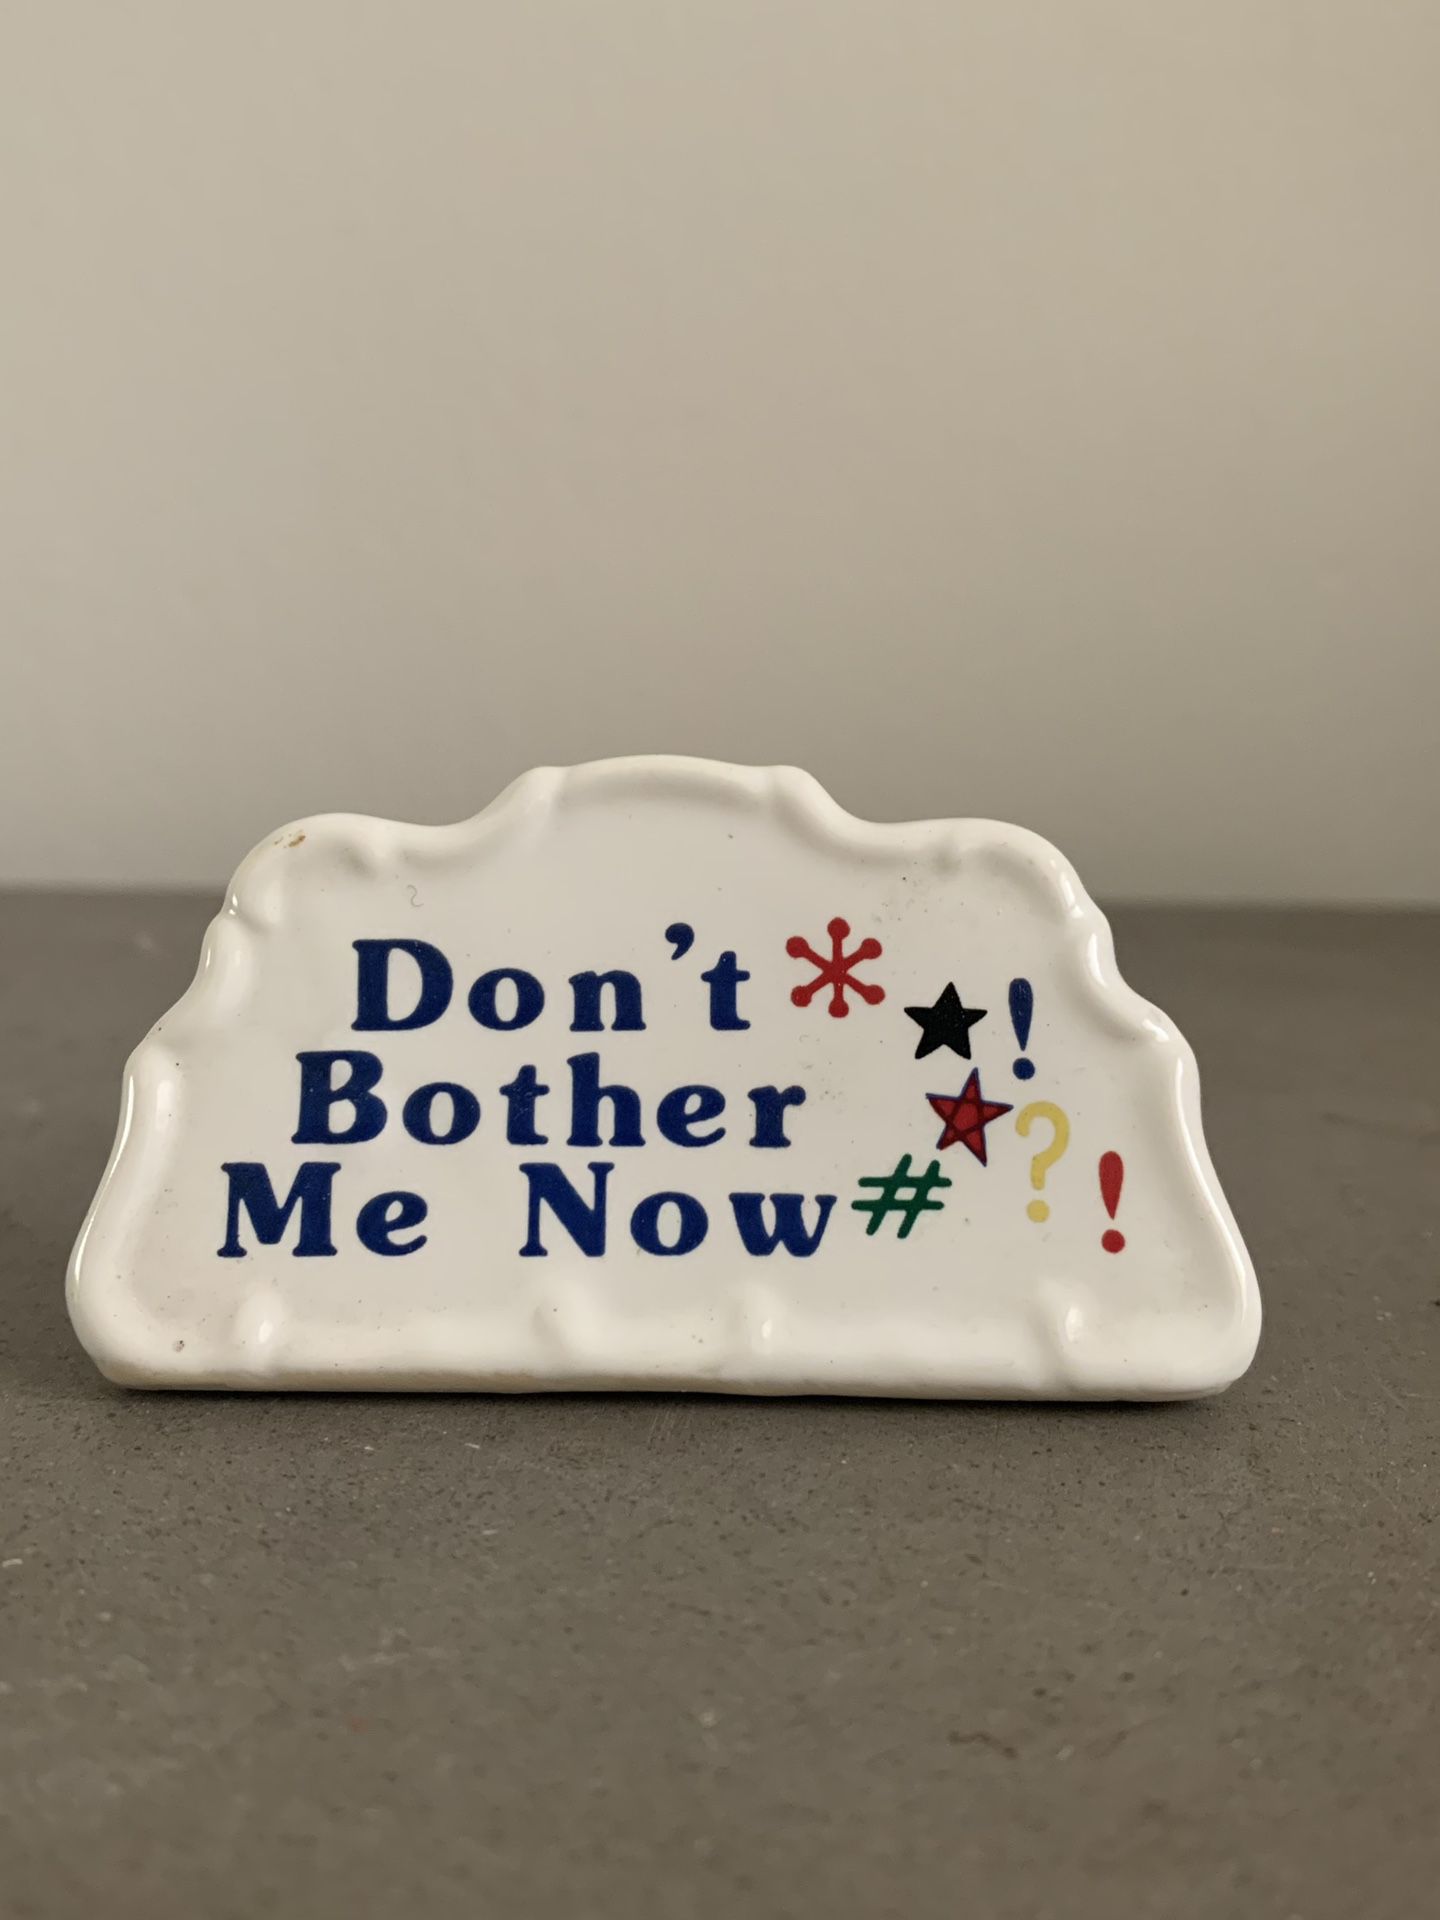 Funny Gag Gift Don’t Bother Me Know Desk Top Paperweight Comical Silly Sayings Words Kitsch Pop 80s 90s Art Deco